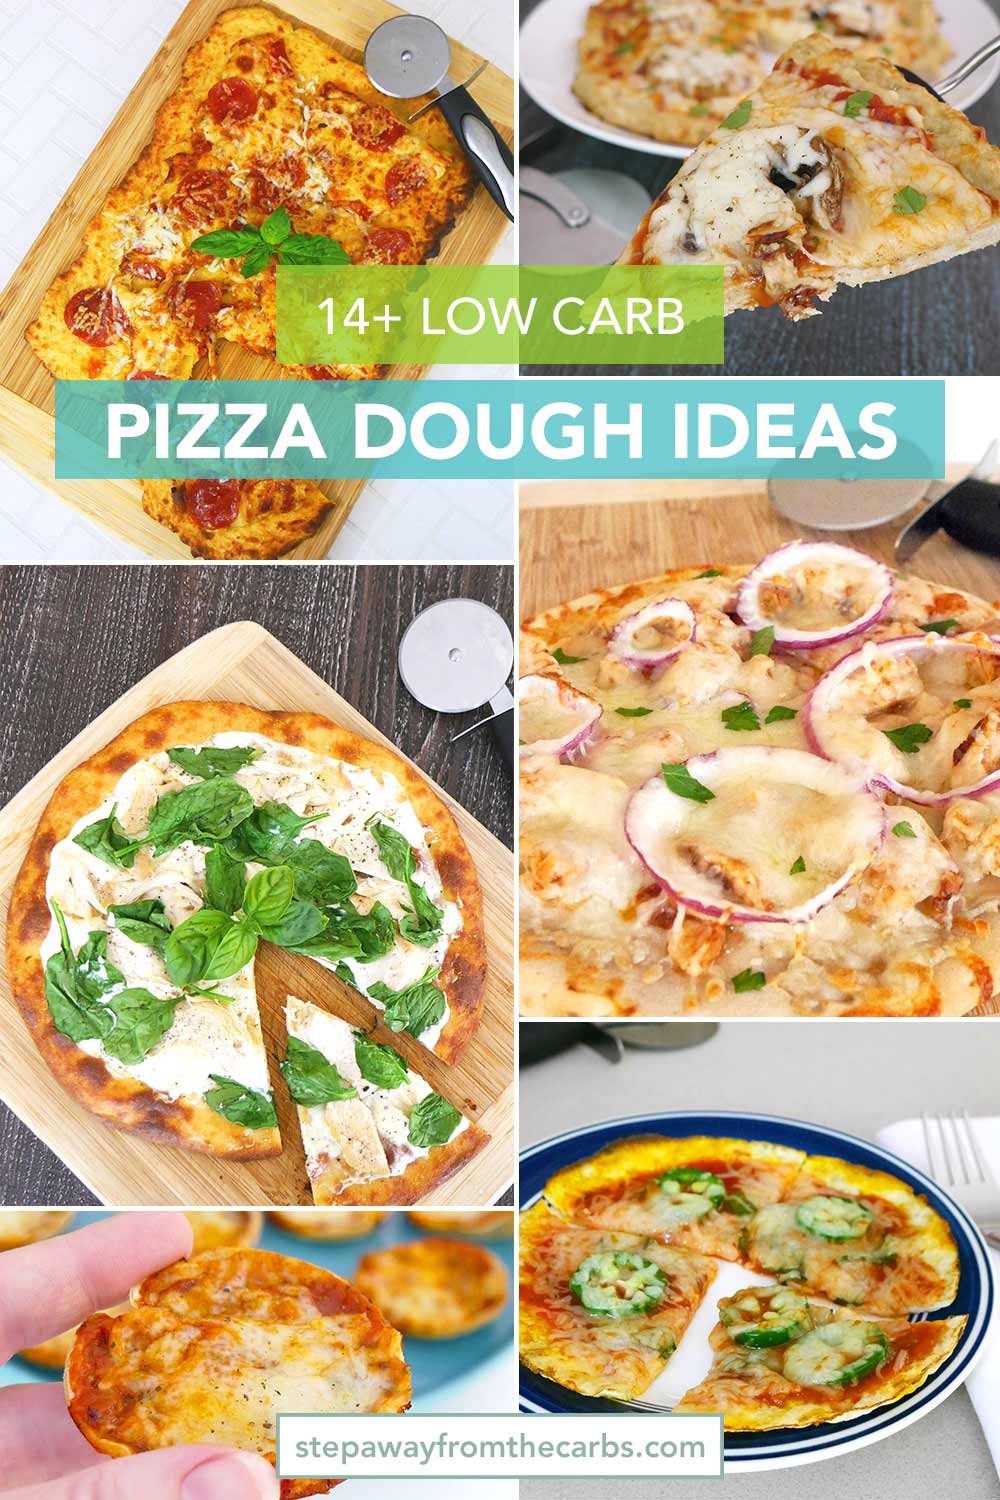 14+ Low Carb Pizza Dough Ideas! Includes the best recipes, ready made, and mixes!